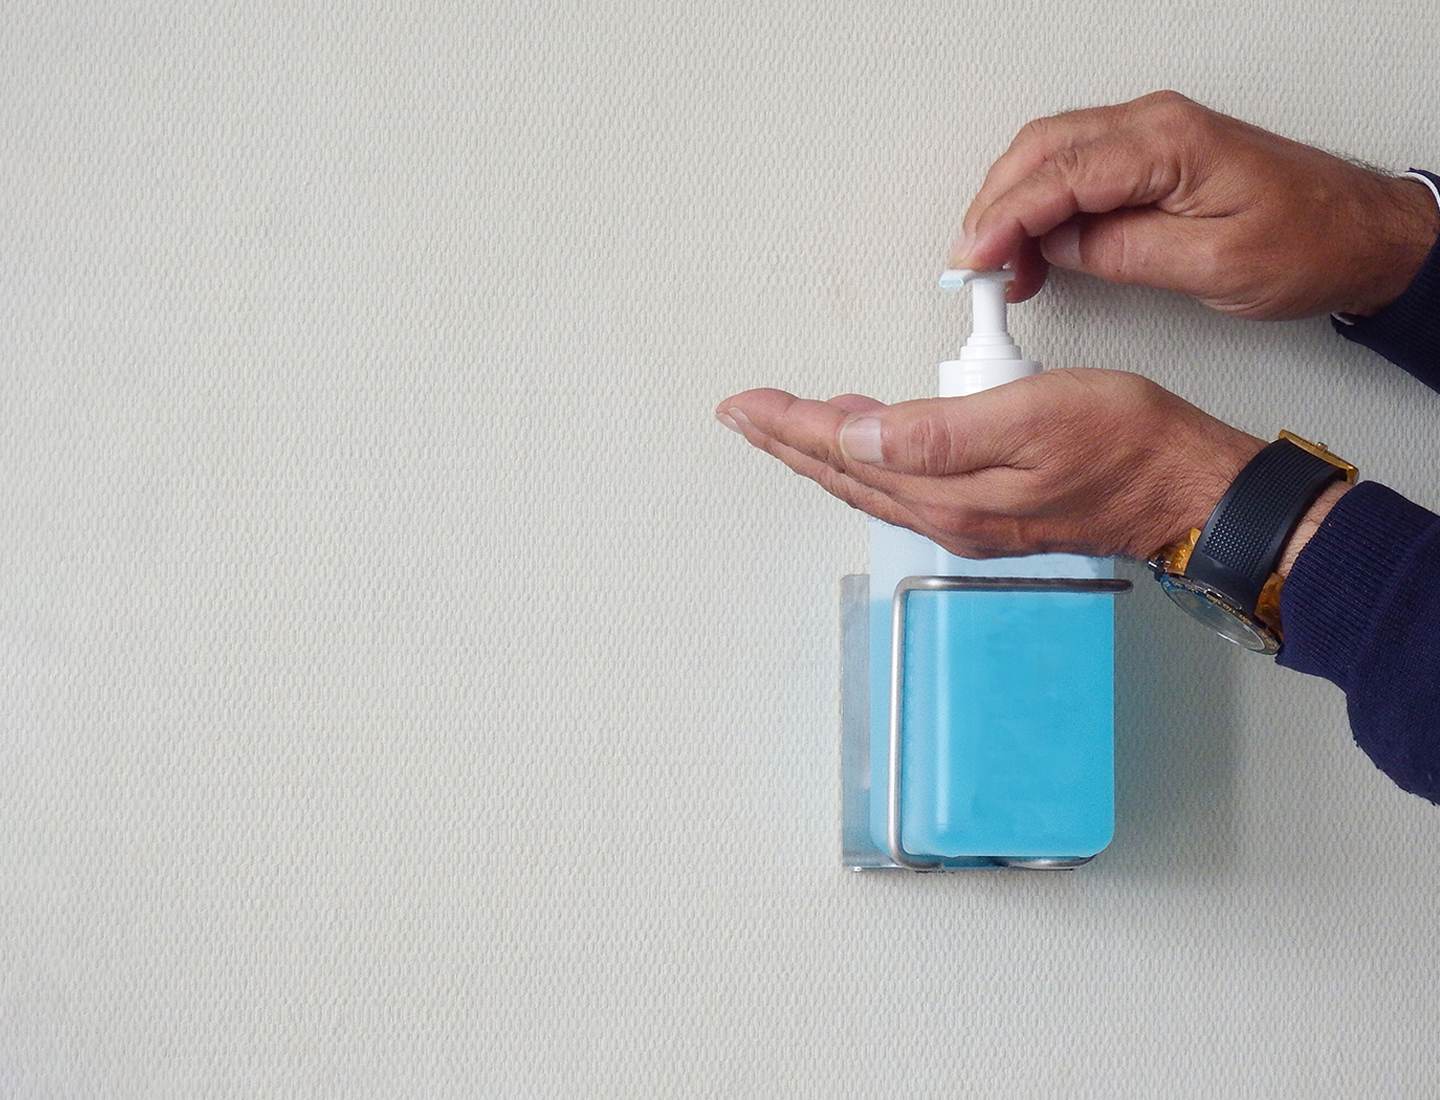 A man disinfects his hands at a disinfectant dispenser.